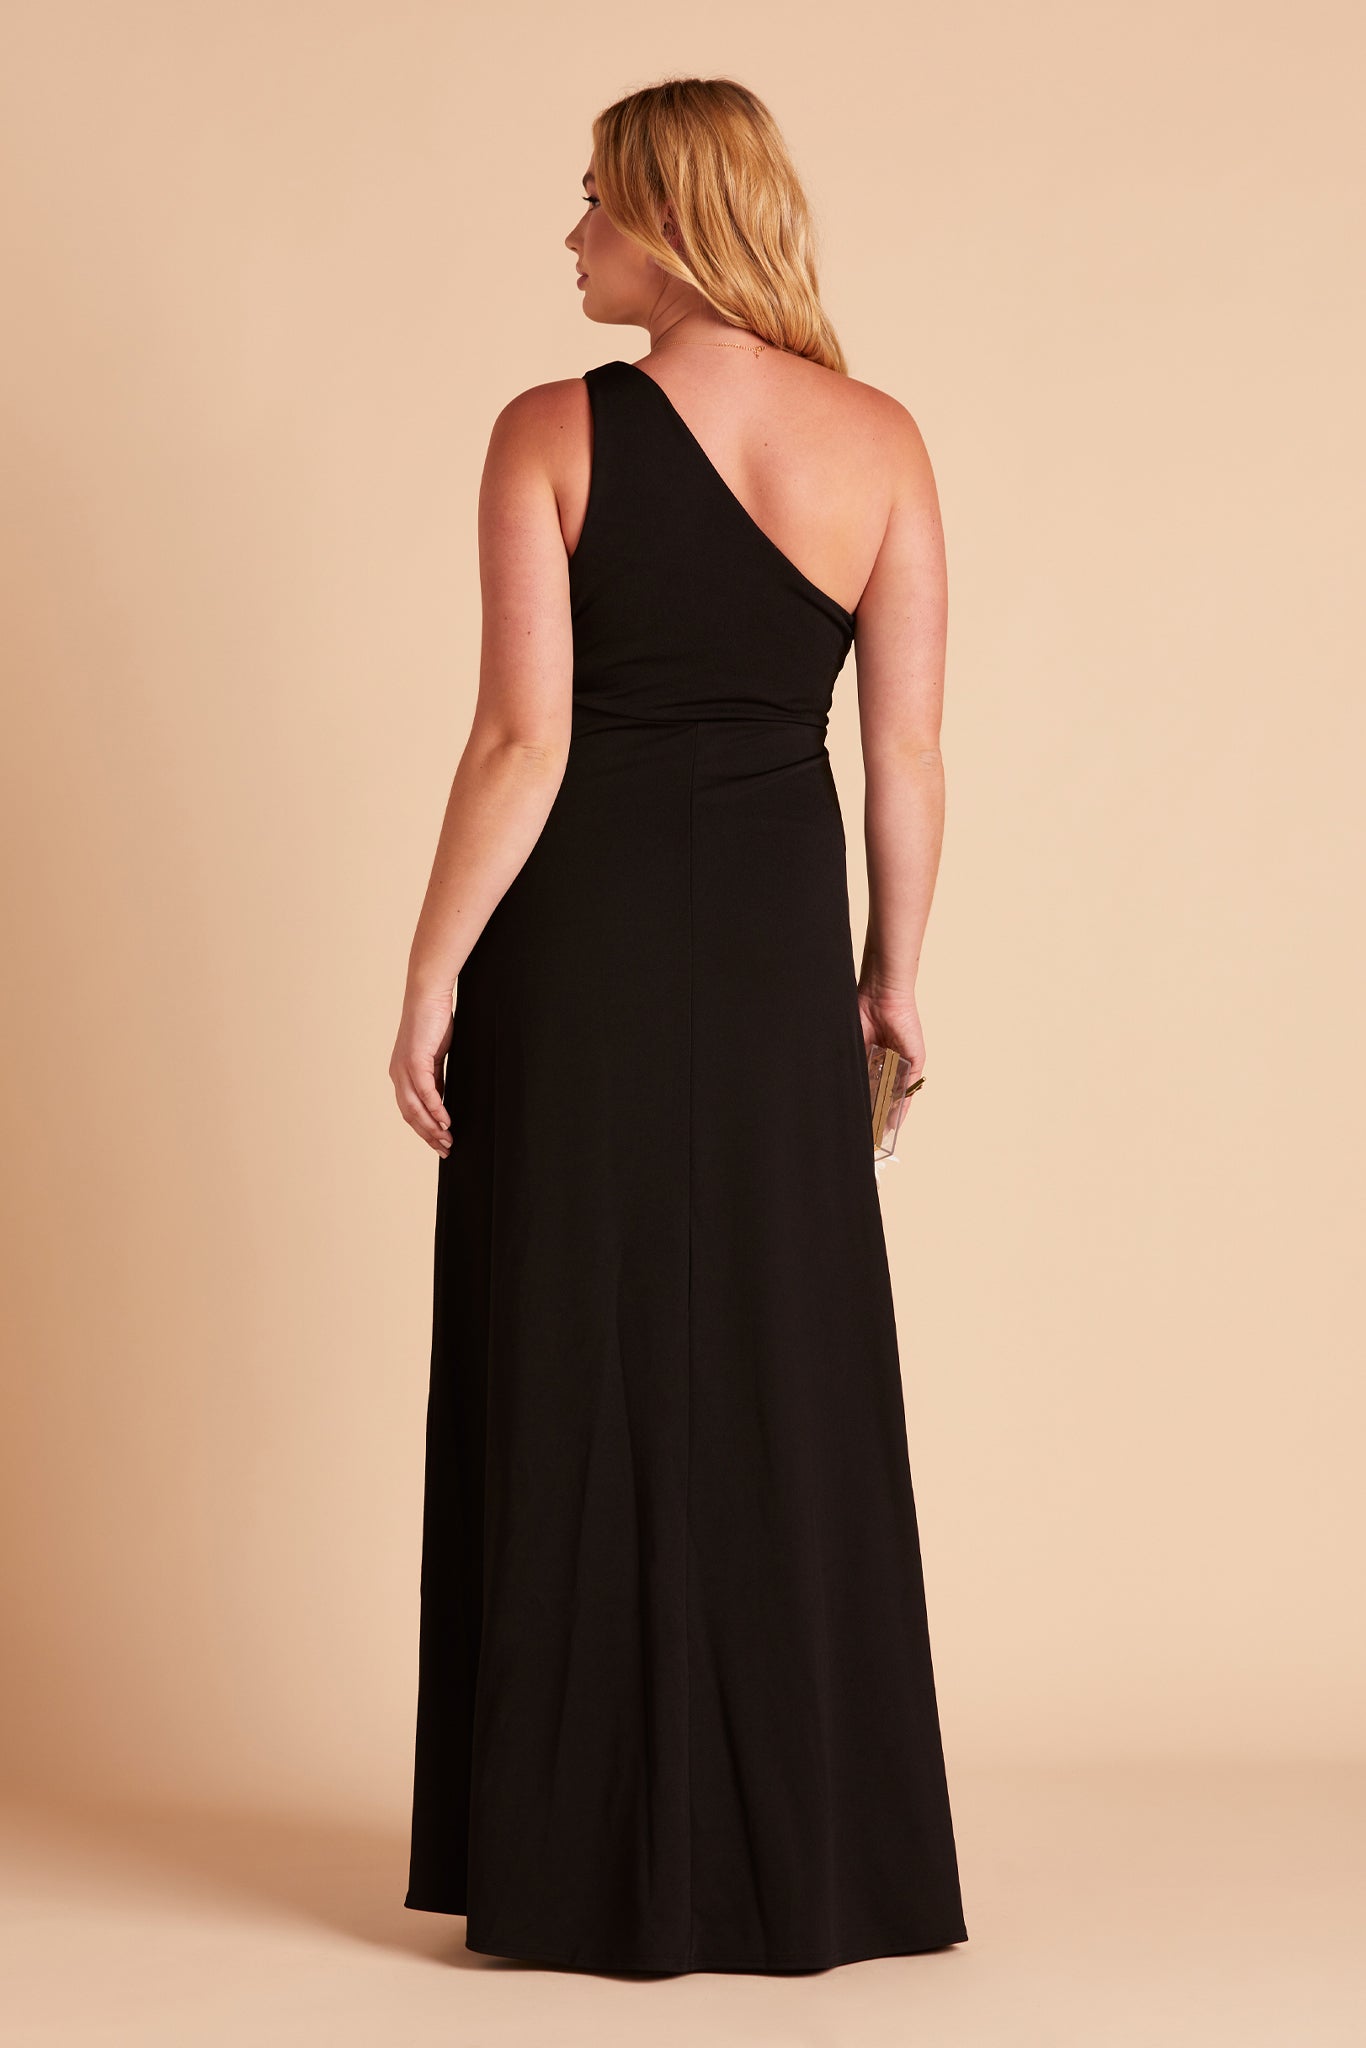 Back view of the full-length Kira Dress in black crepe shows a curvy model wearing an asymmetrical one-shoulder, full-length dress. Soft pleating gathers at the shoulder of the bodice with a smooth, conformed fit at the waist. 